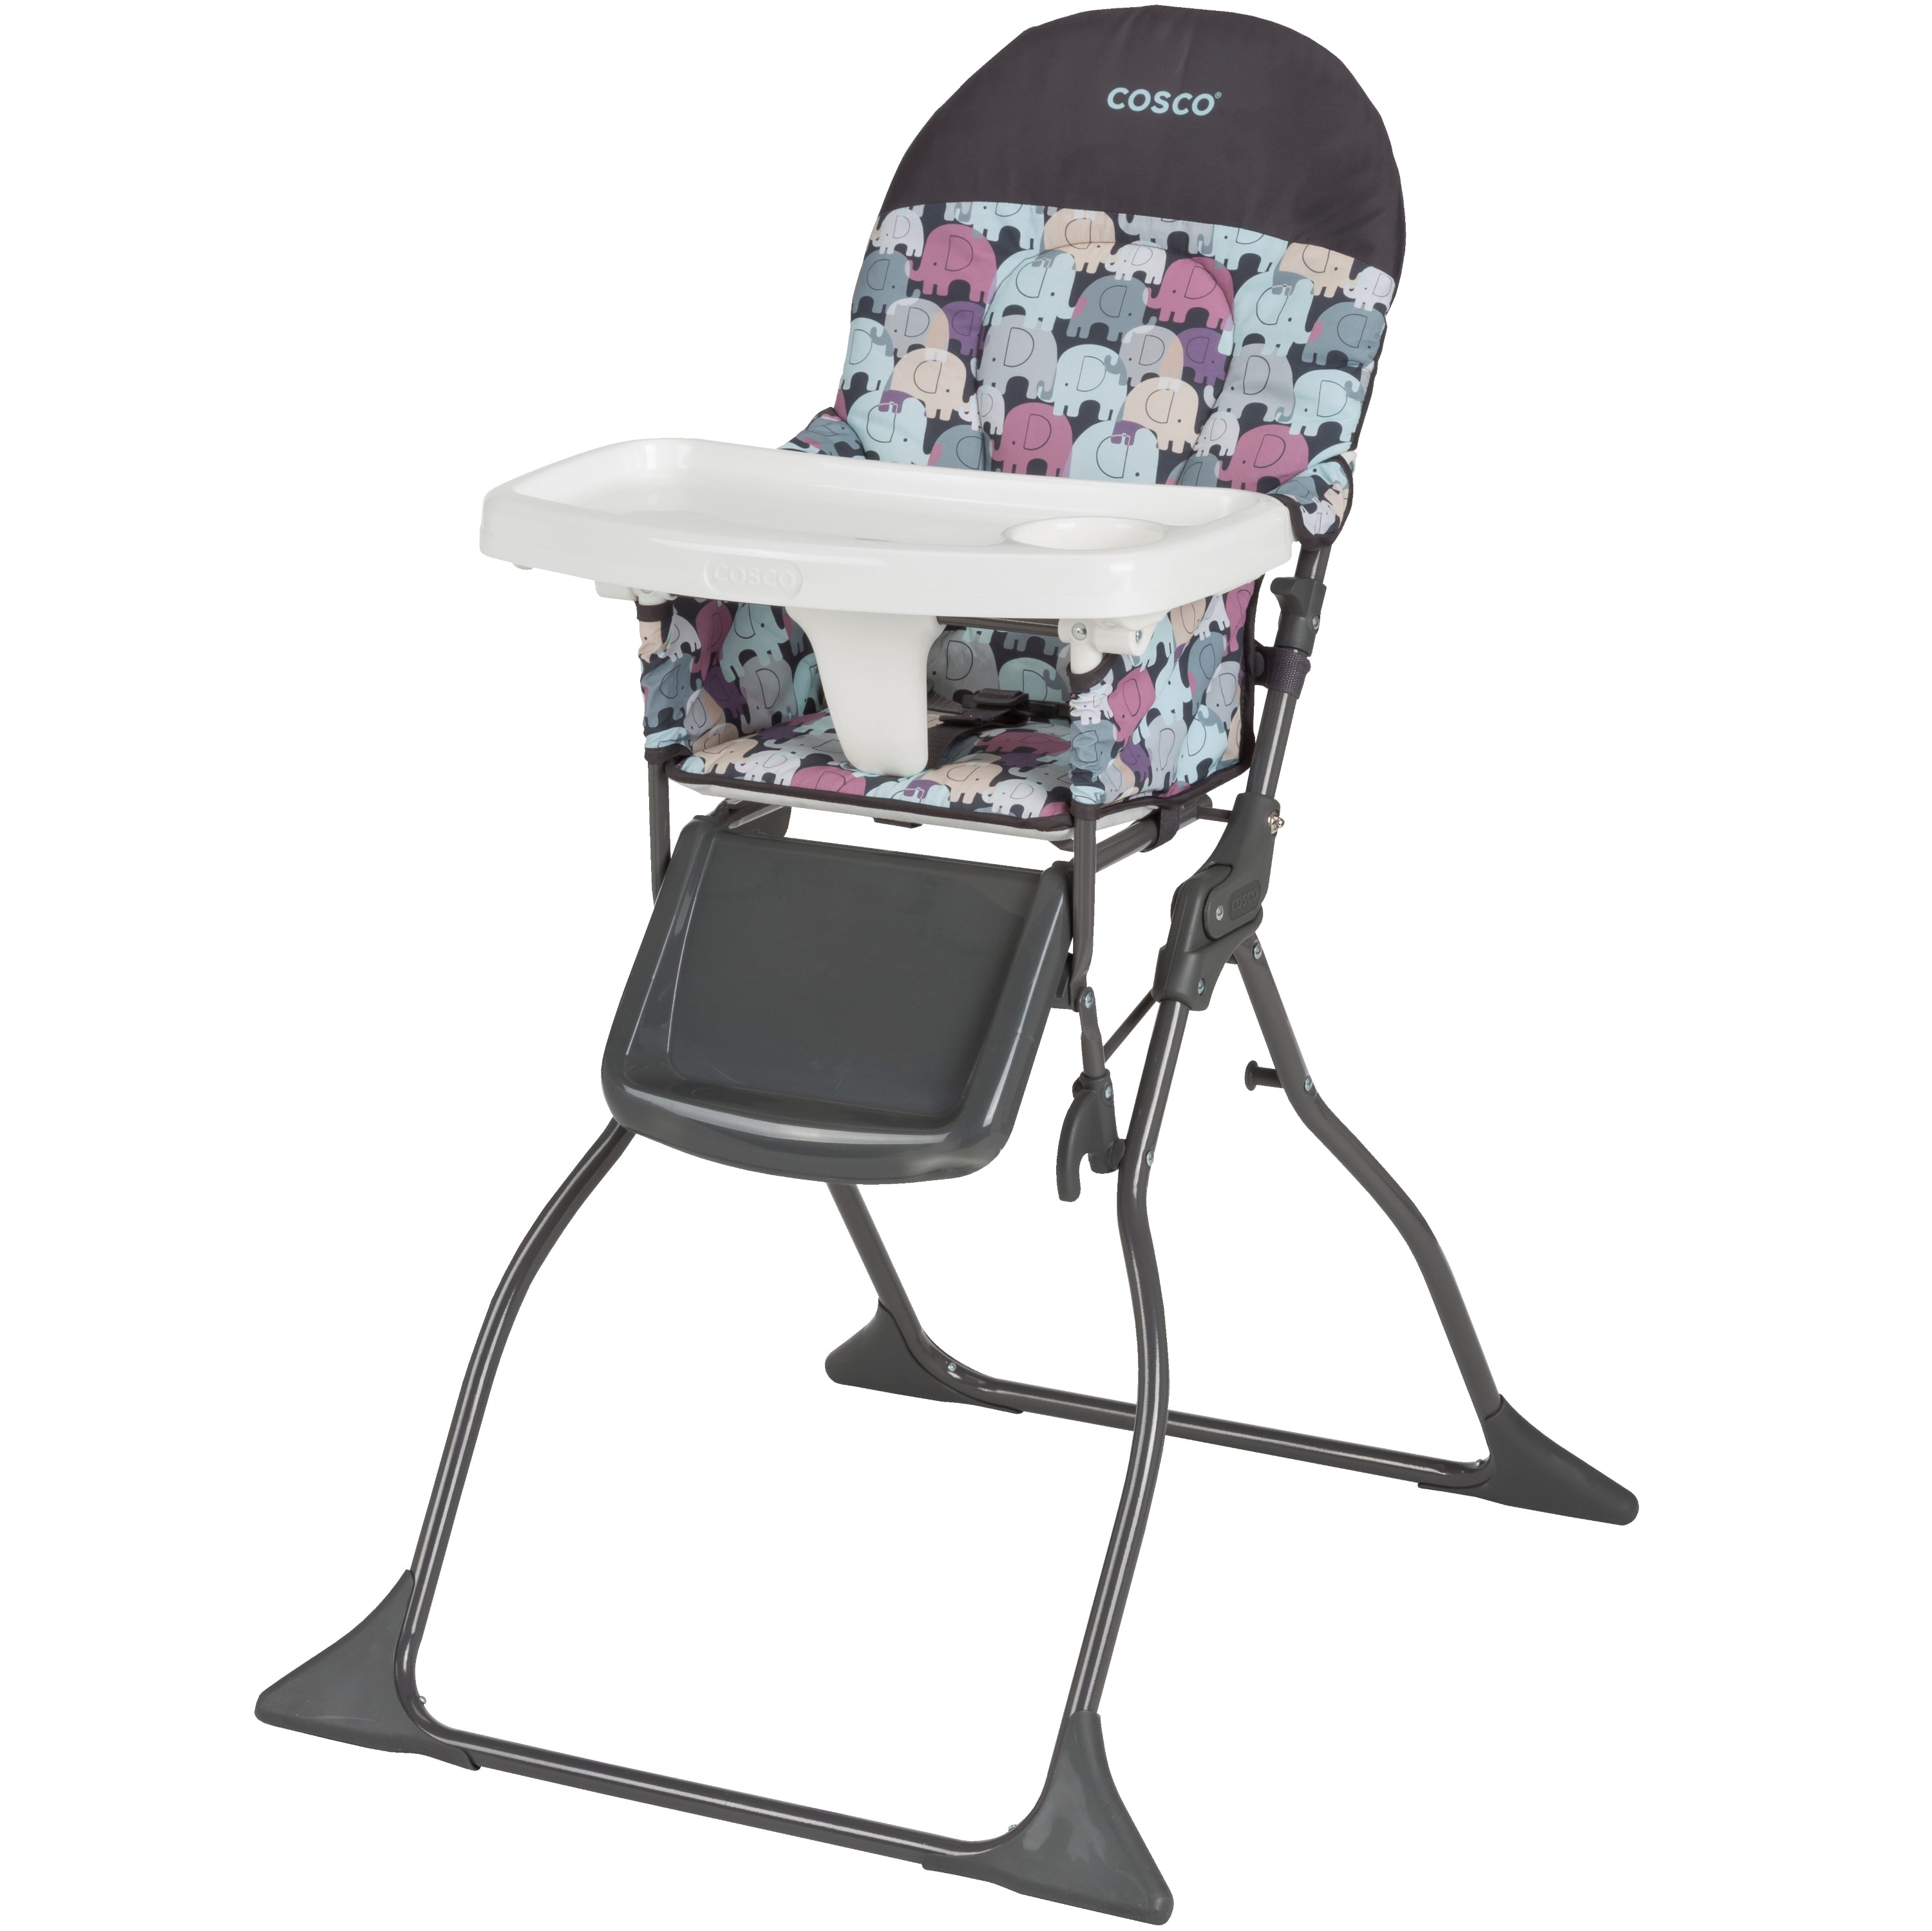 Simple Fold™ Full Size High Chair with Adjustable Tray - Elephant Puzzle